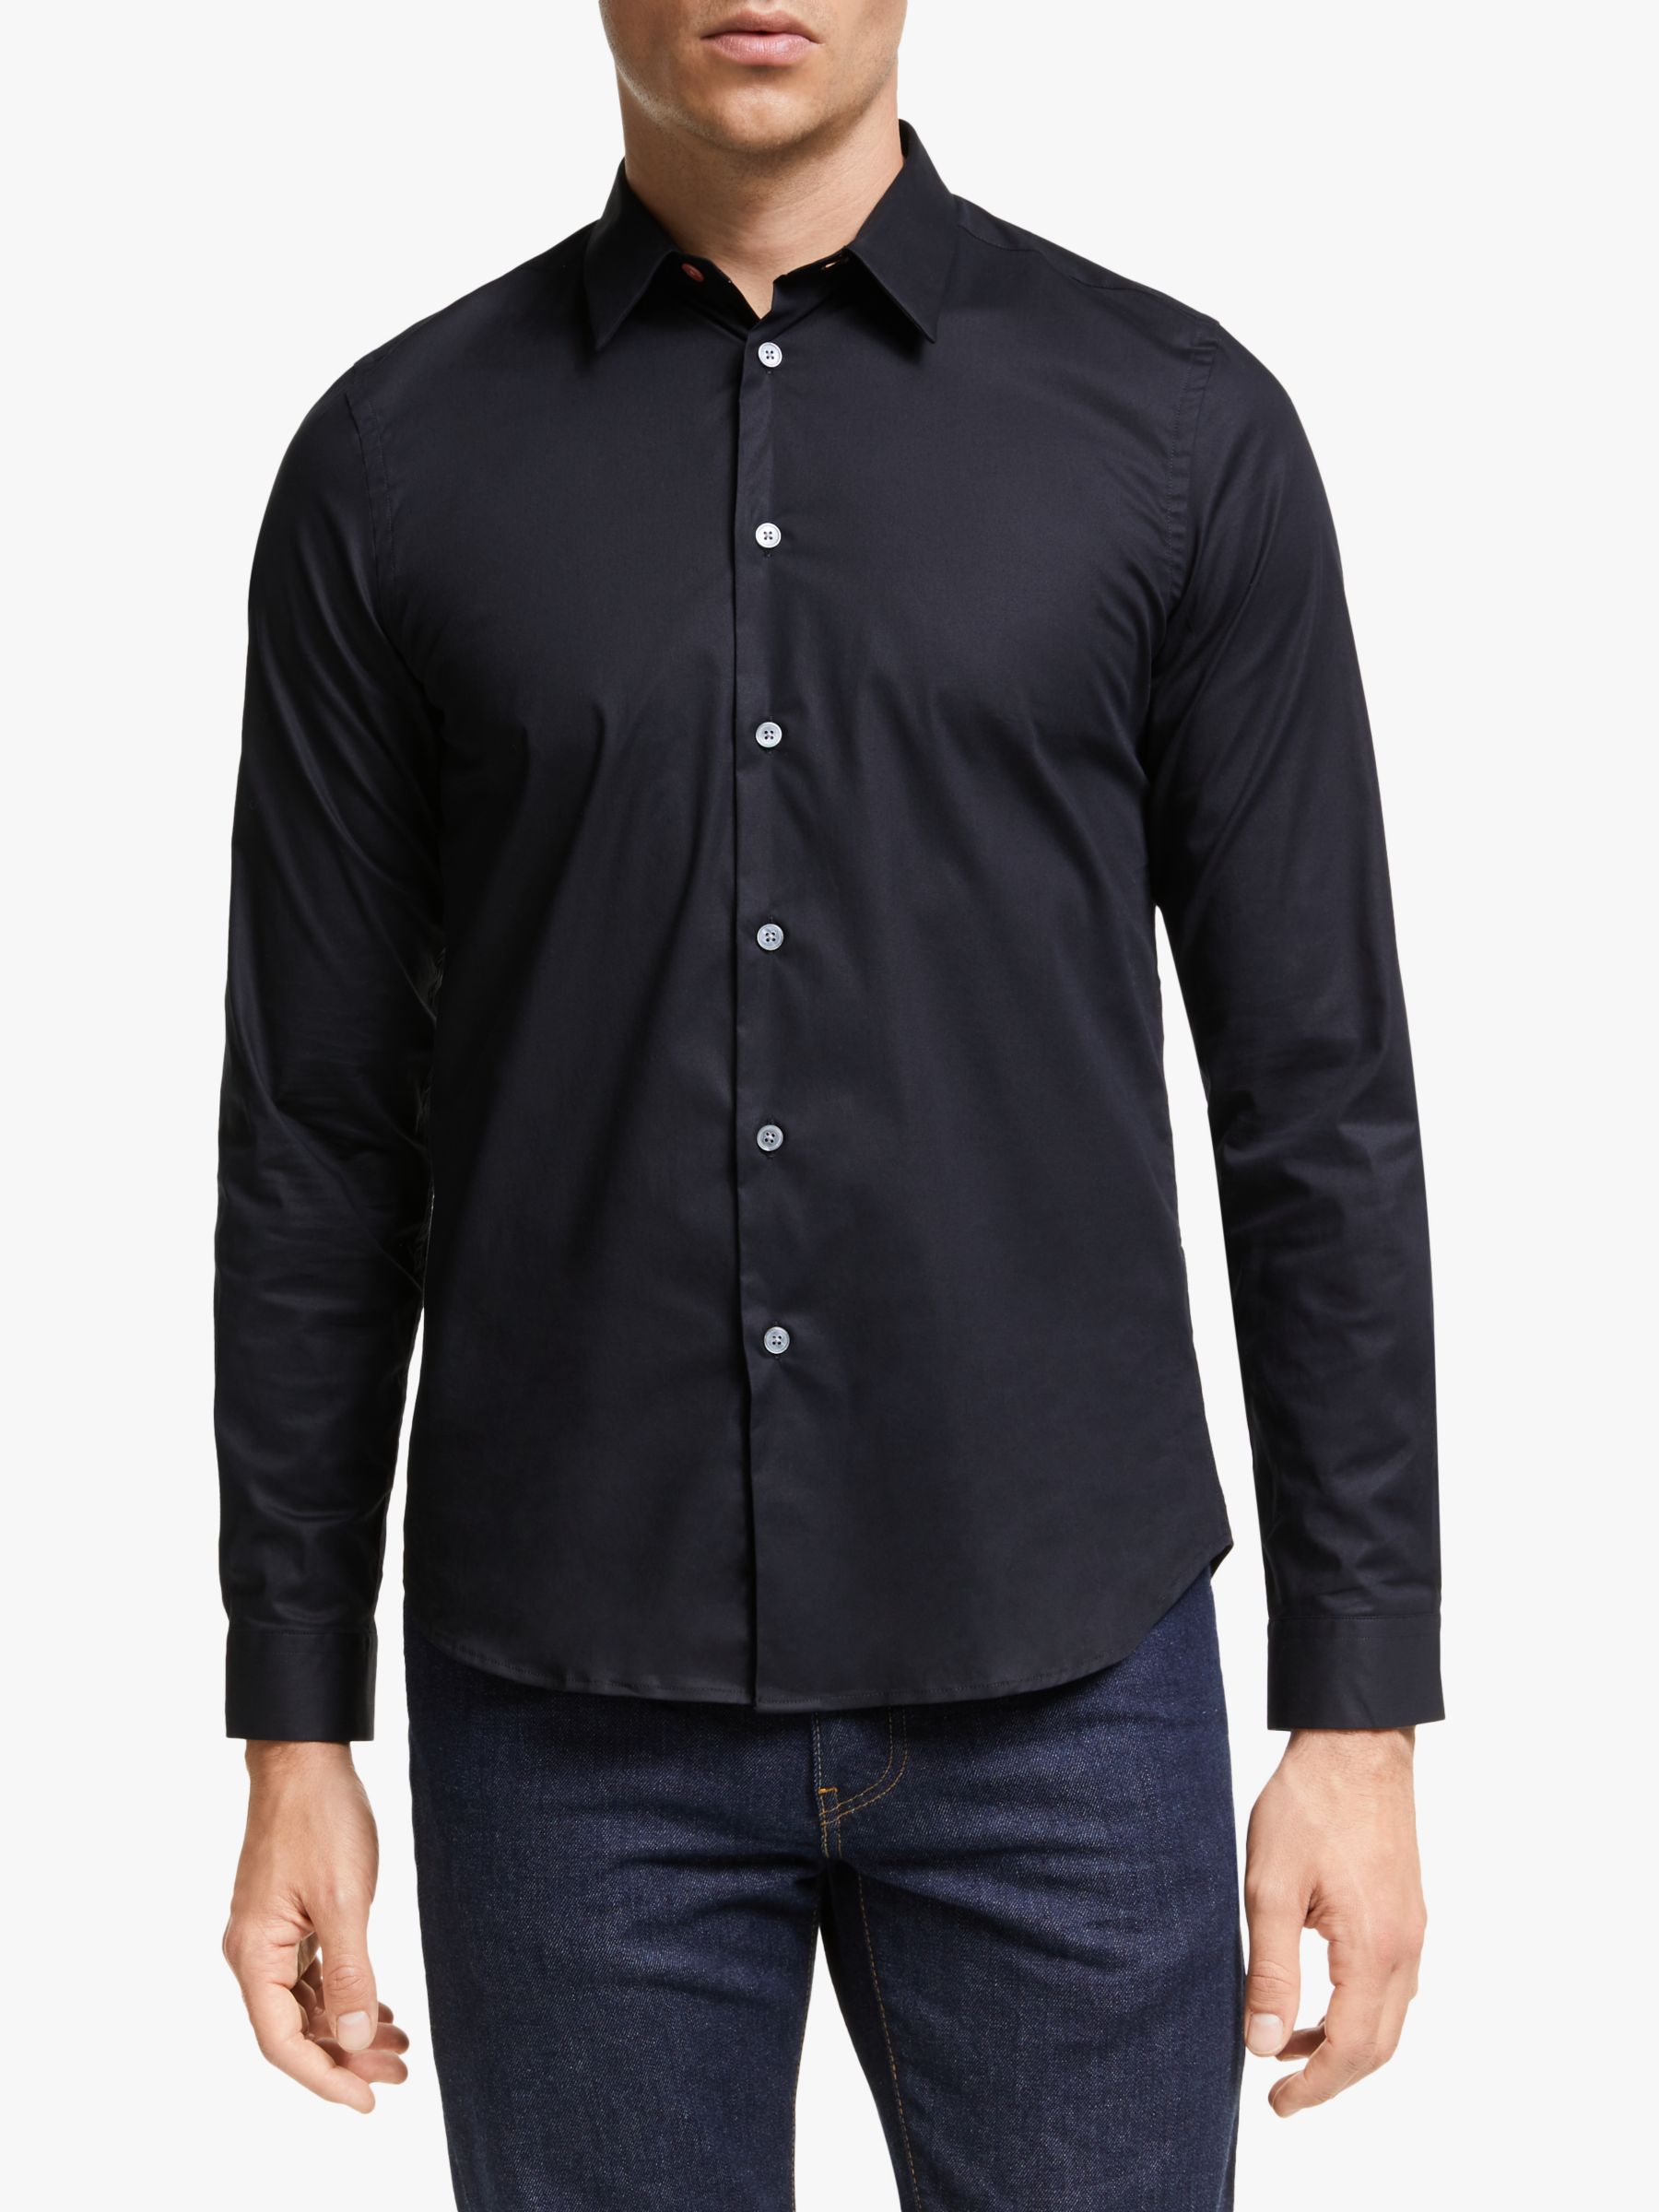 PS Paul Smith Stretch Cotton Shirt, Black at John Lewis & Partners